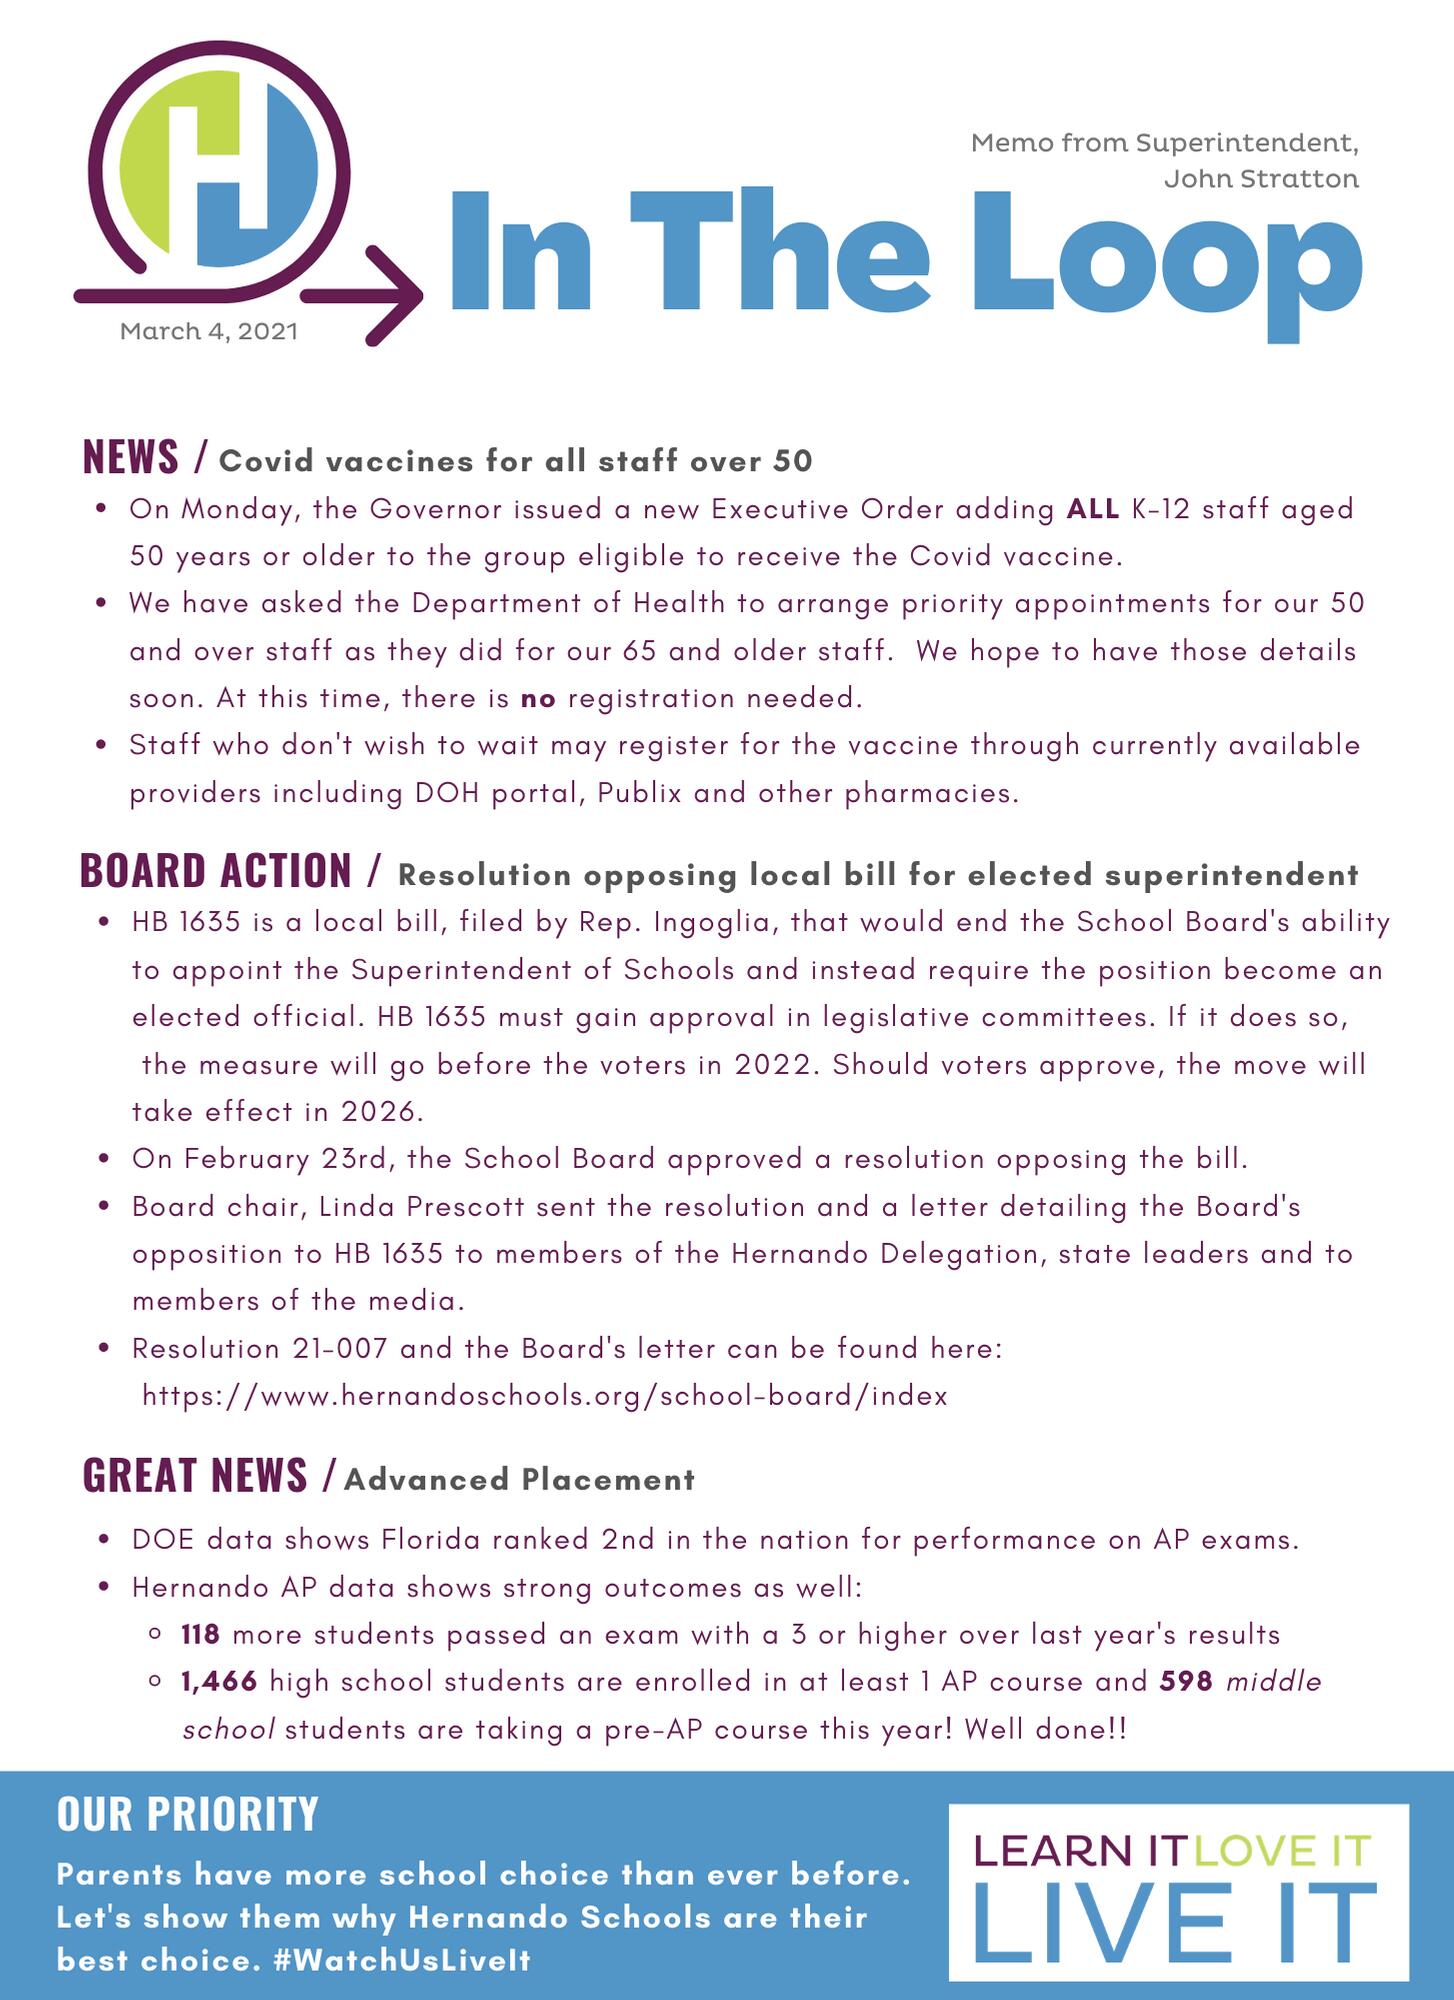 In the loop - March 4 edition